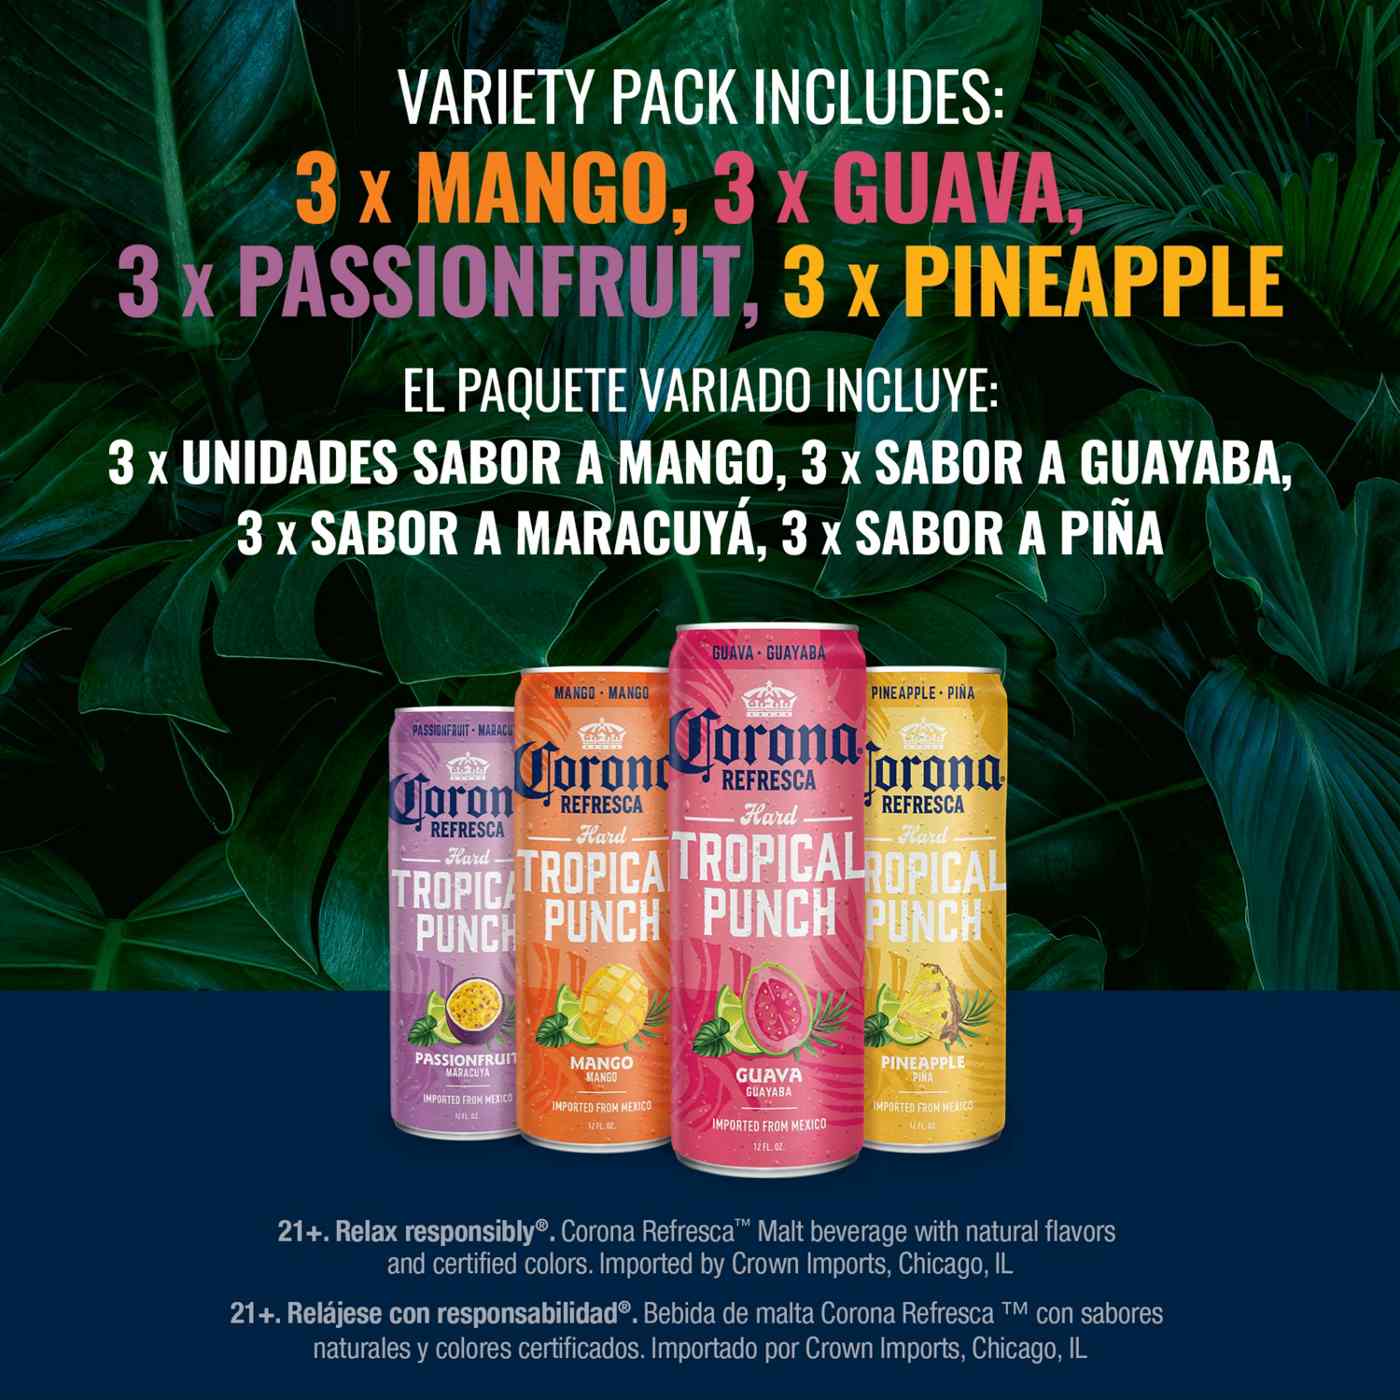 Corona Refresca Hard Tropical Punch Variety Pack 12 oz Cans, 12 pk; image 7 of 10